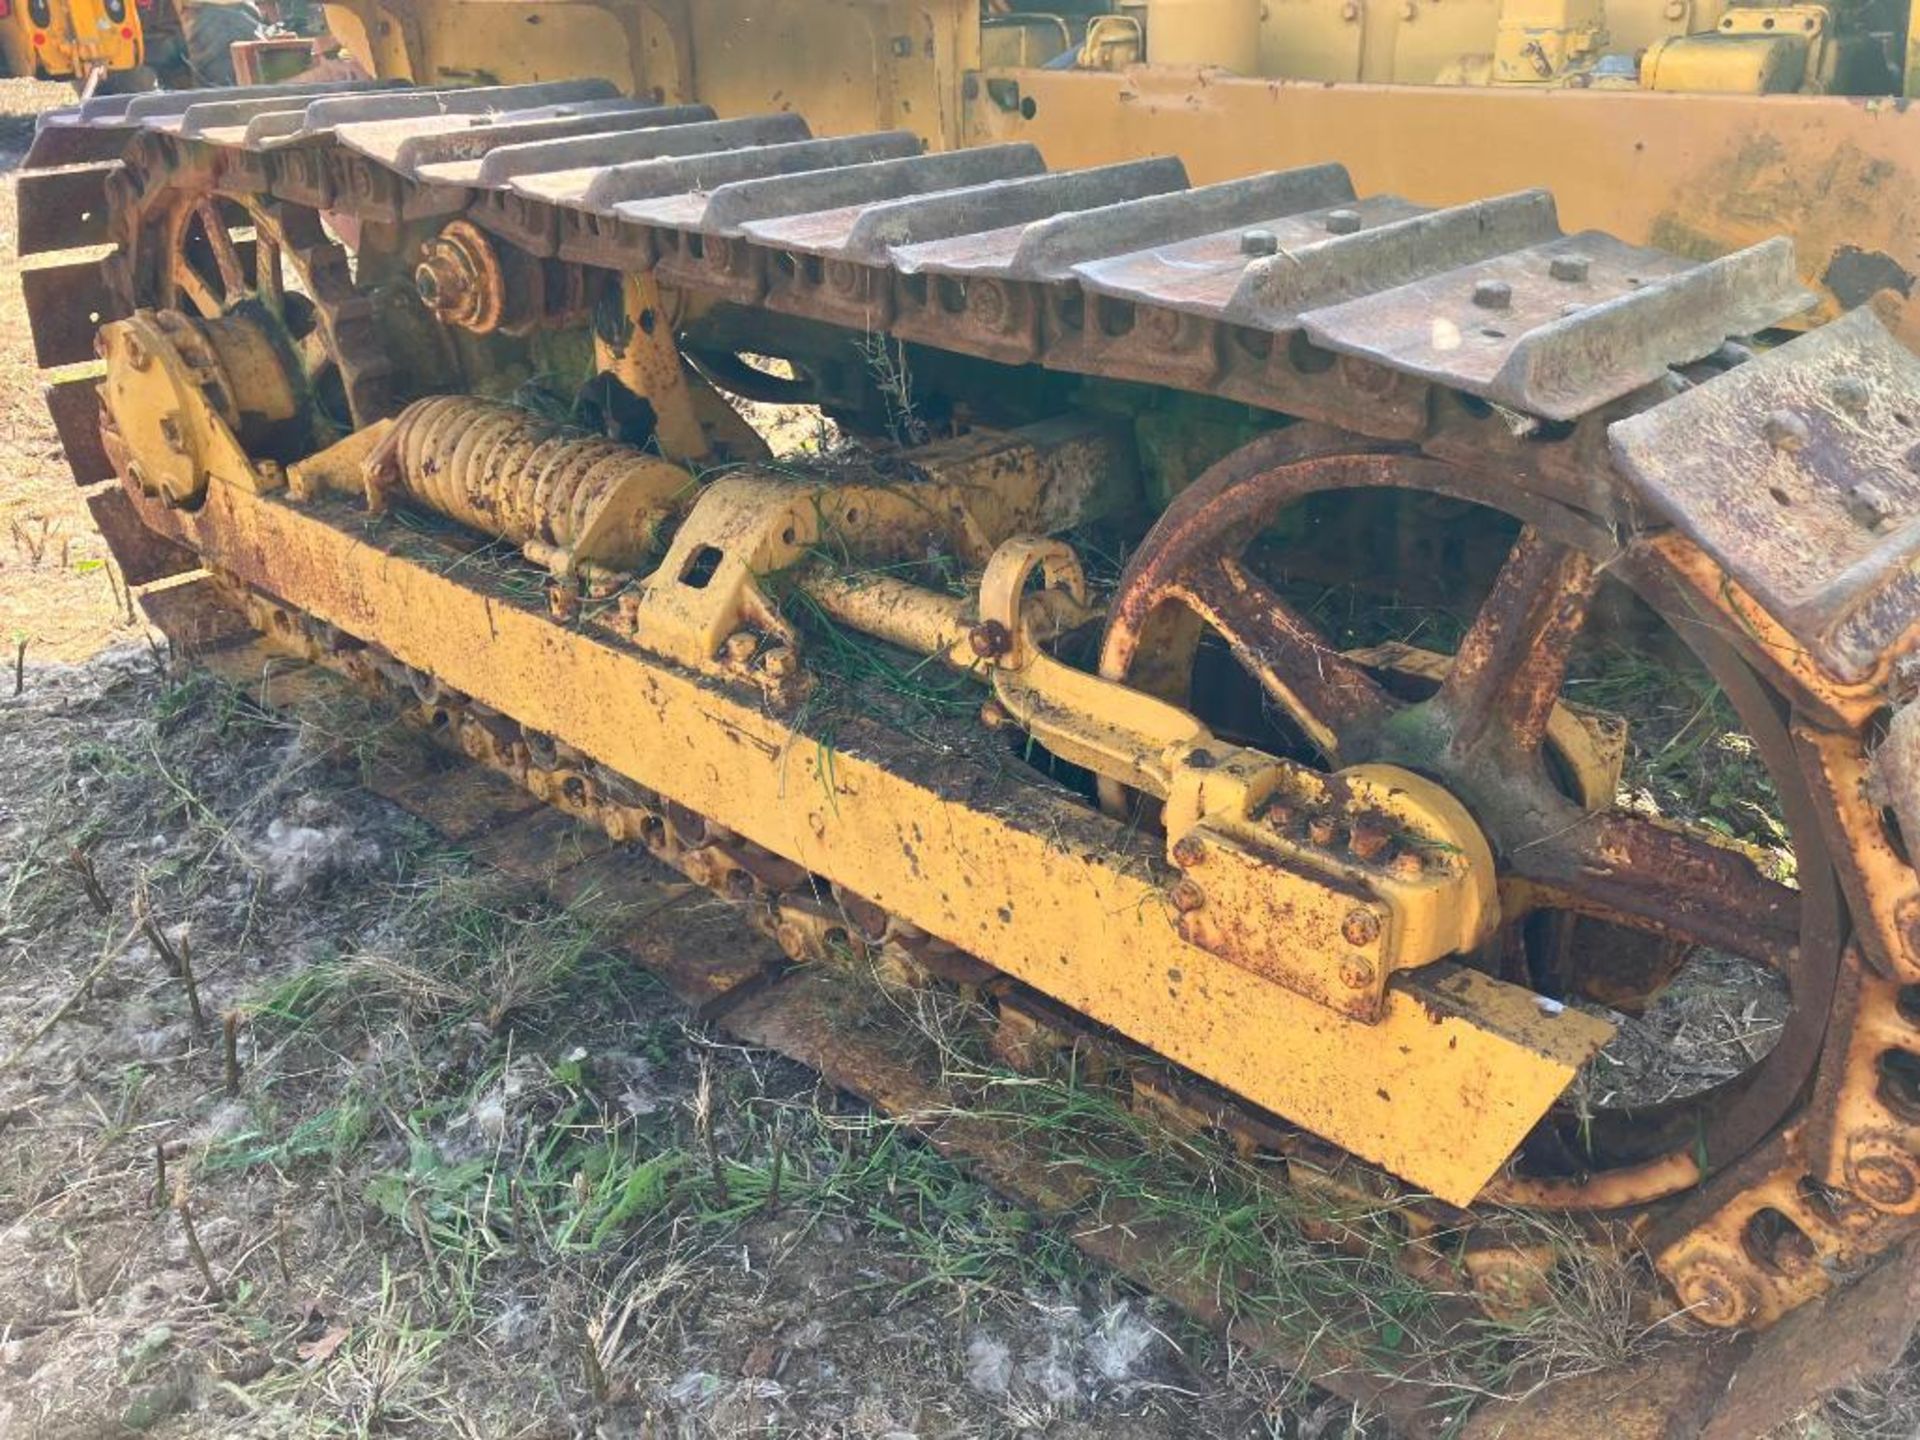 1949 Caterpillar D4 wide gauge metal tracked crawler with 16" tracks , swinging drawbar and rear cab - Image 18 of 18